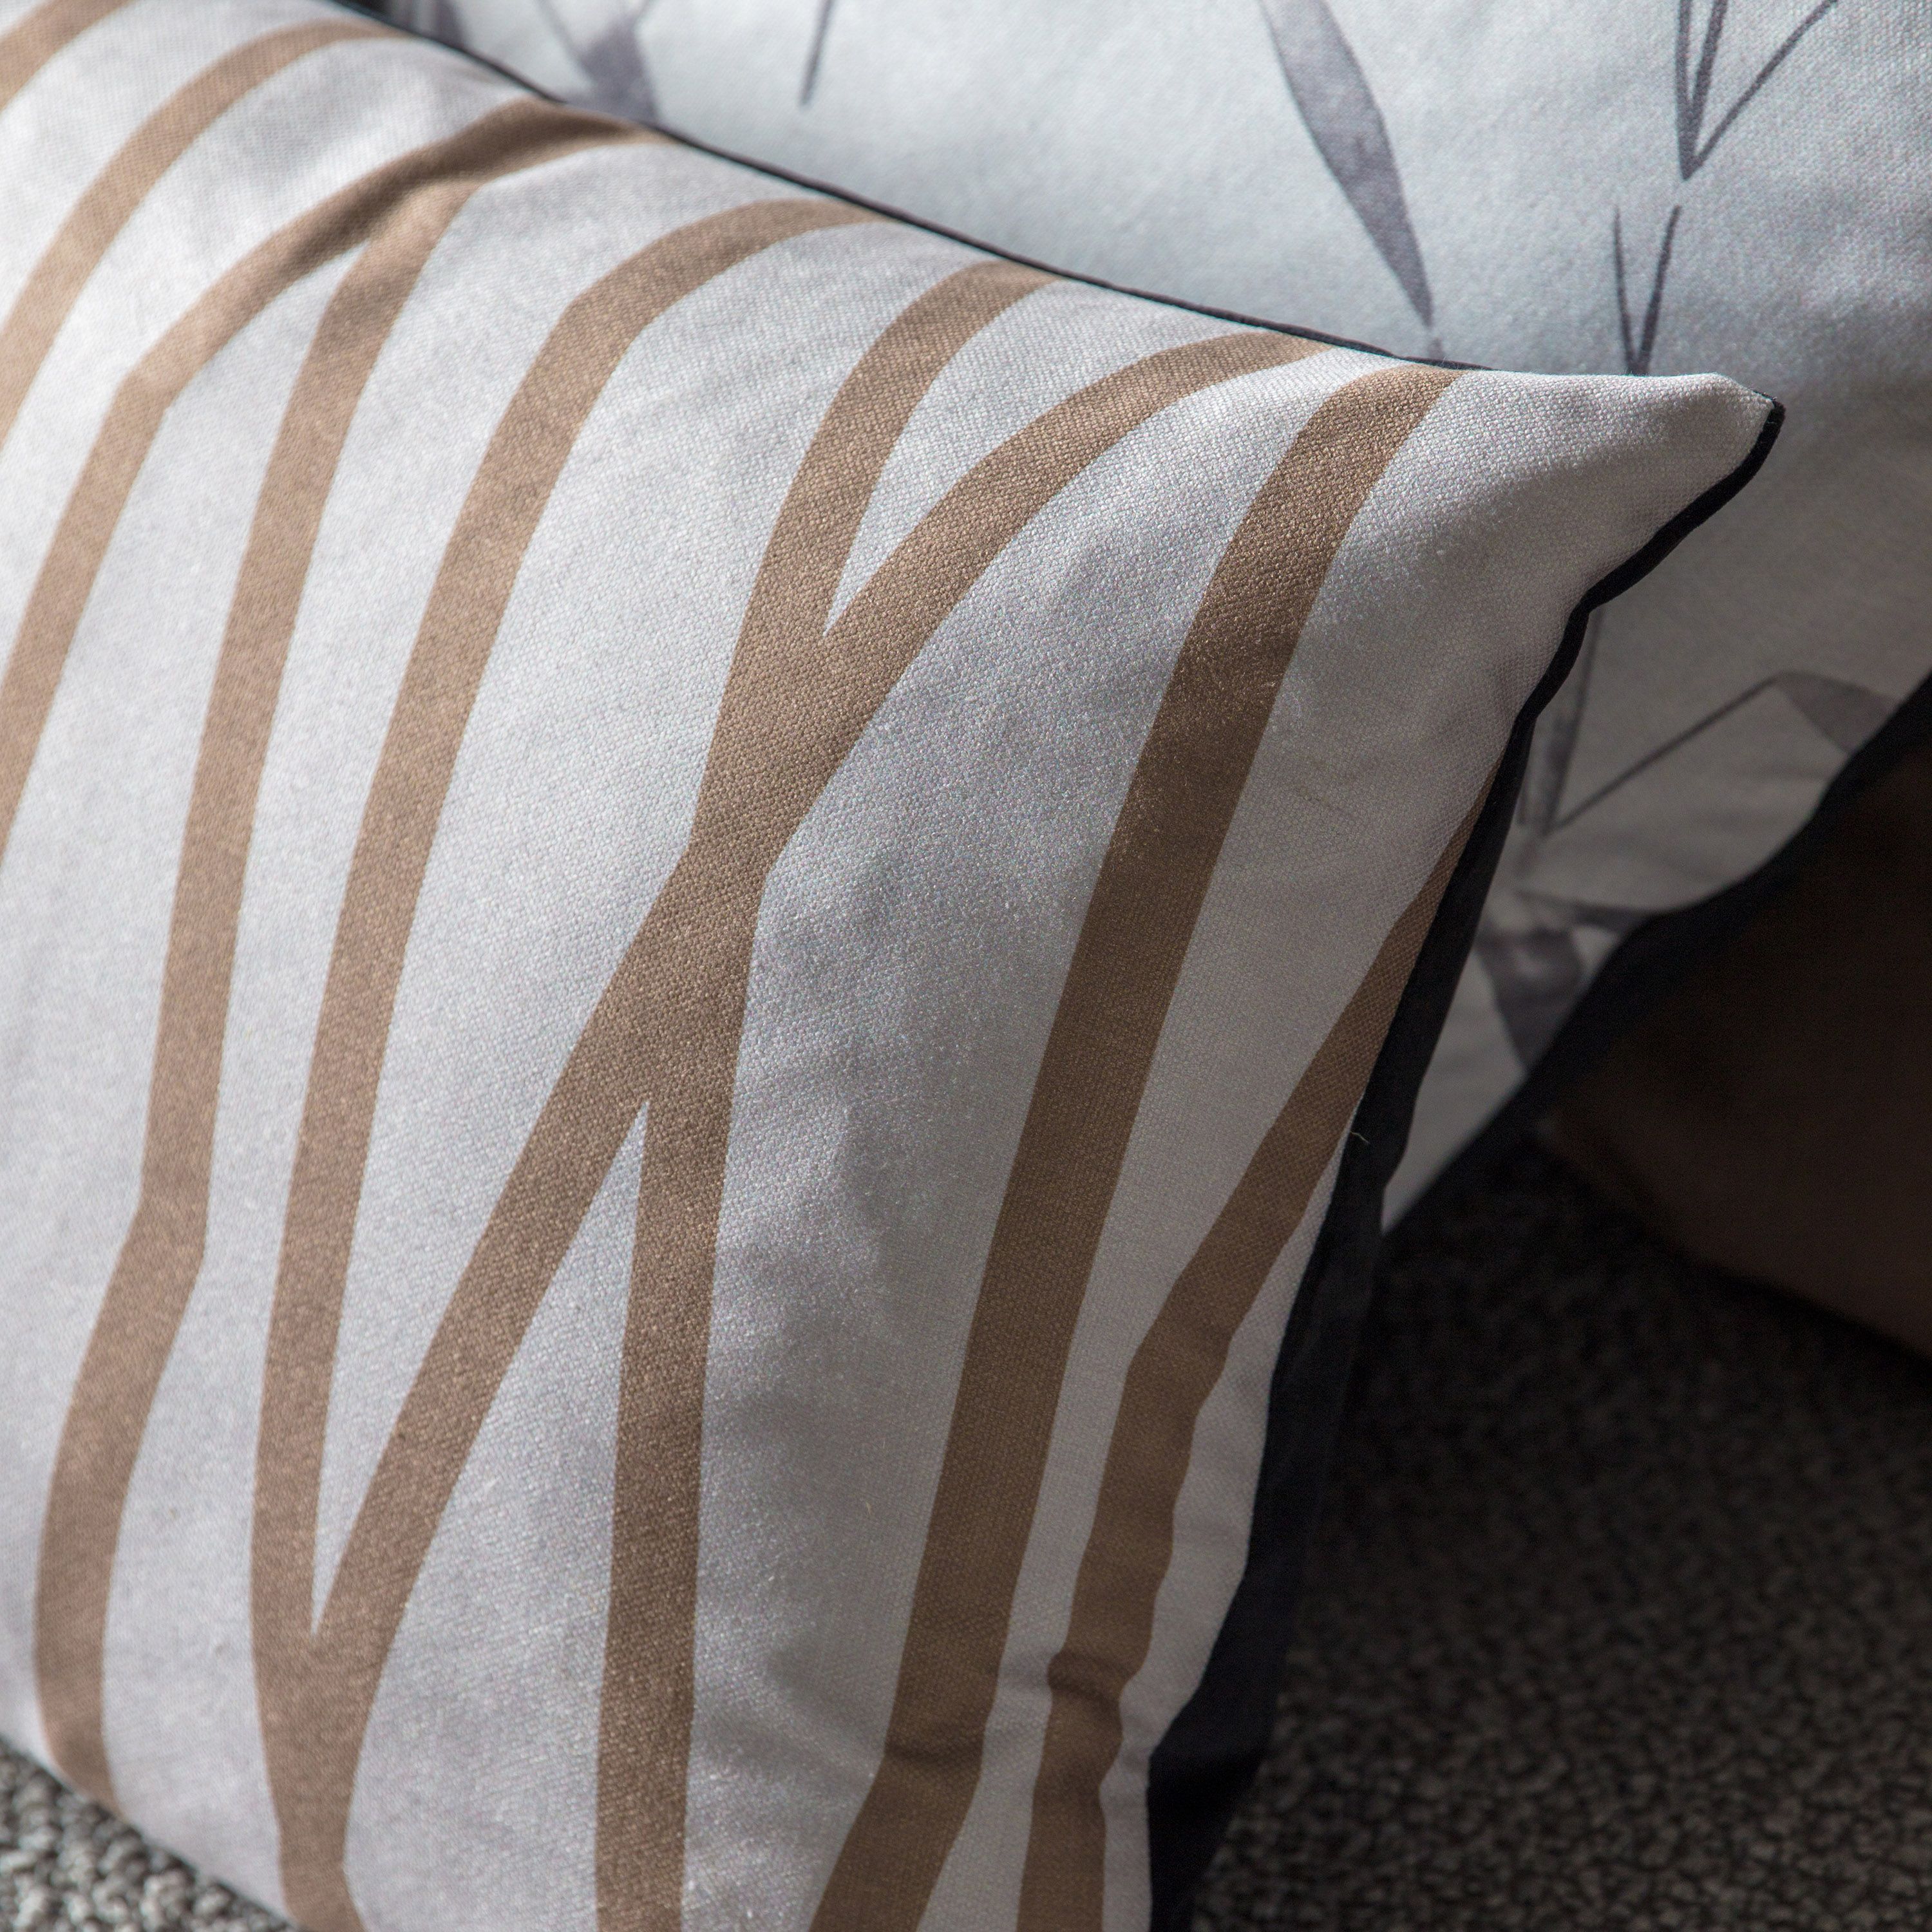 Neutral Abstract Cushion - Outlet - Save 20%